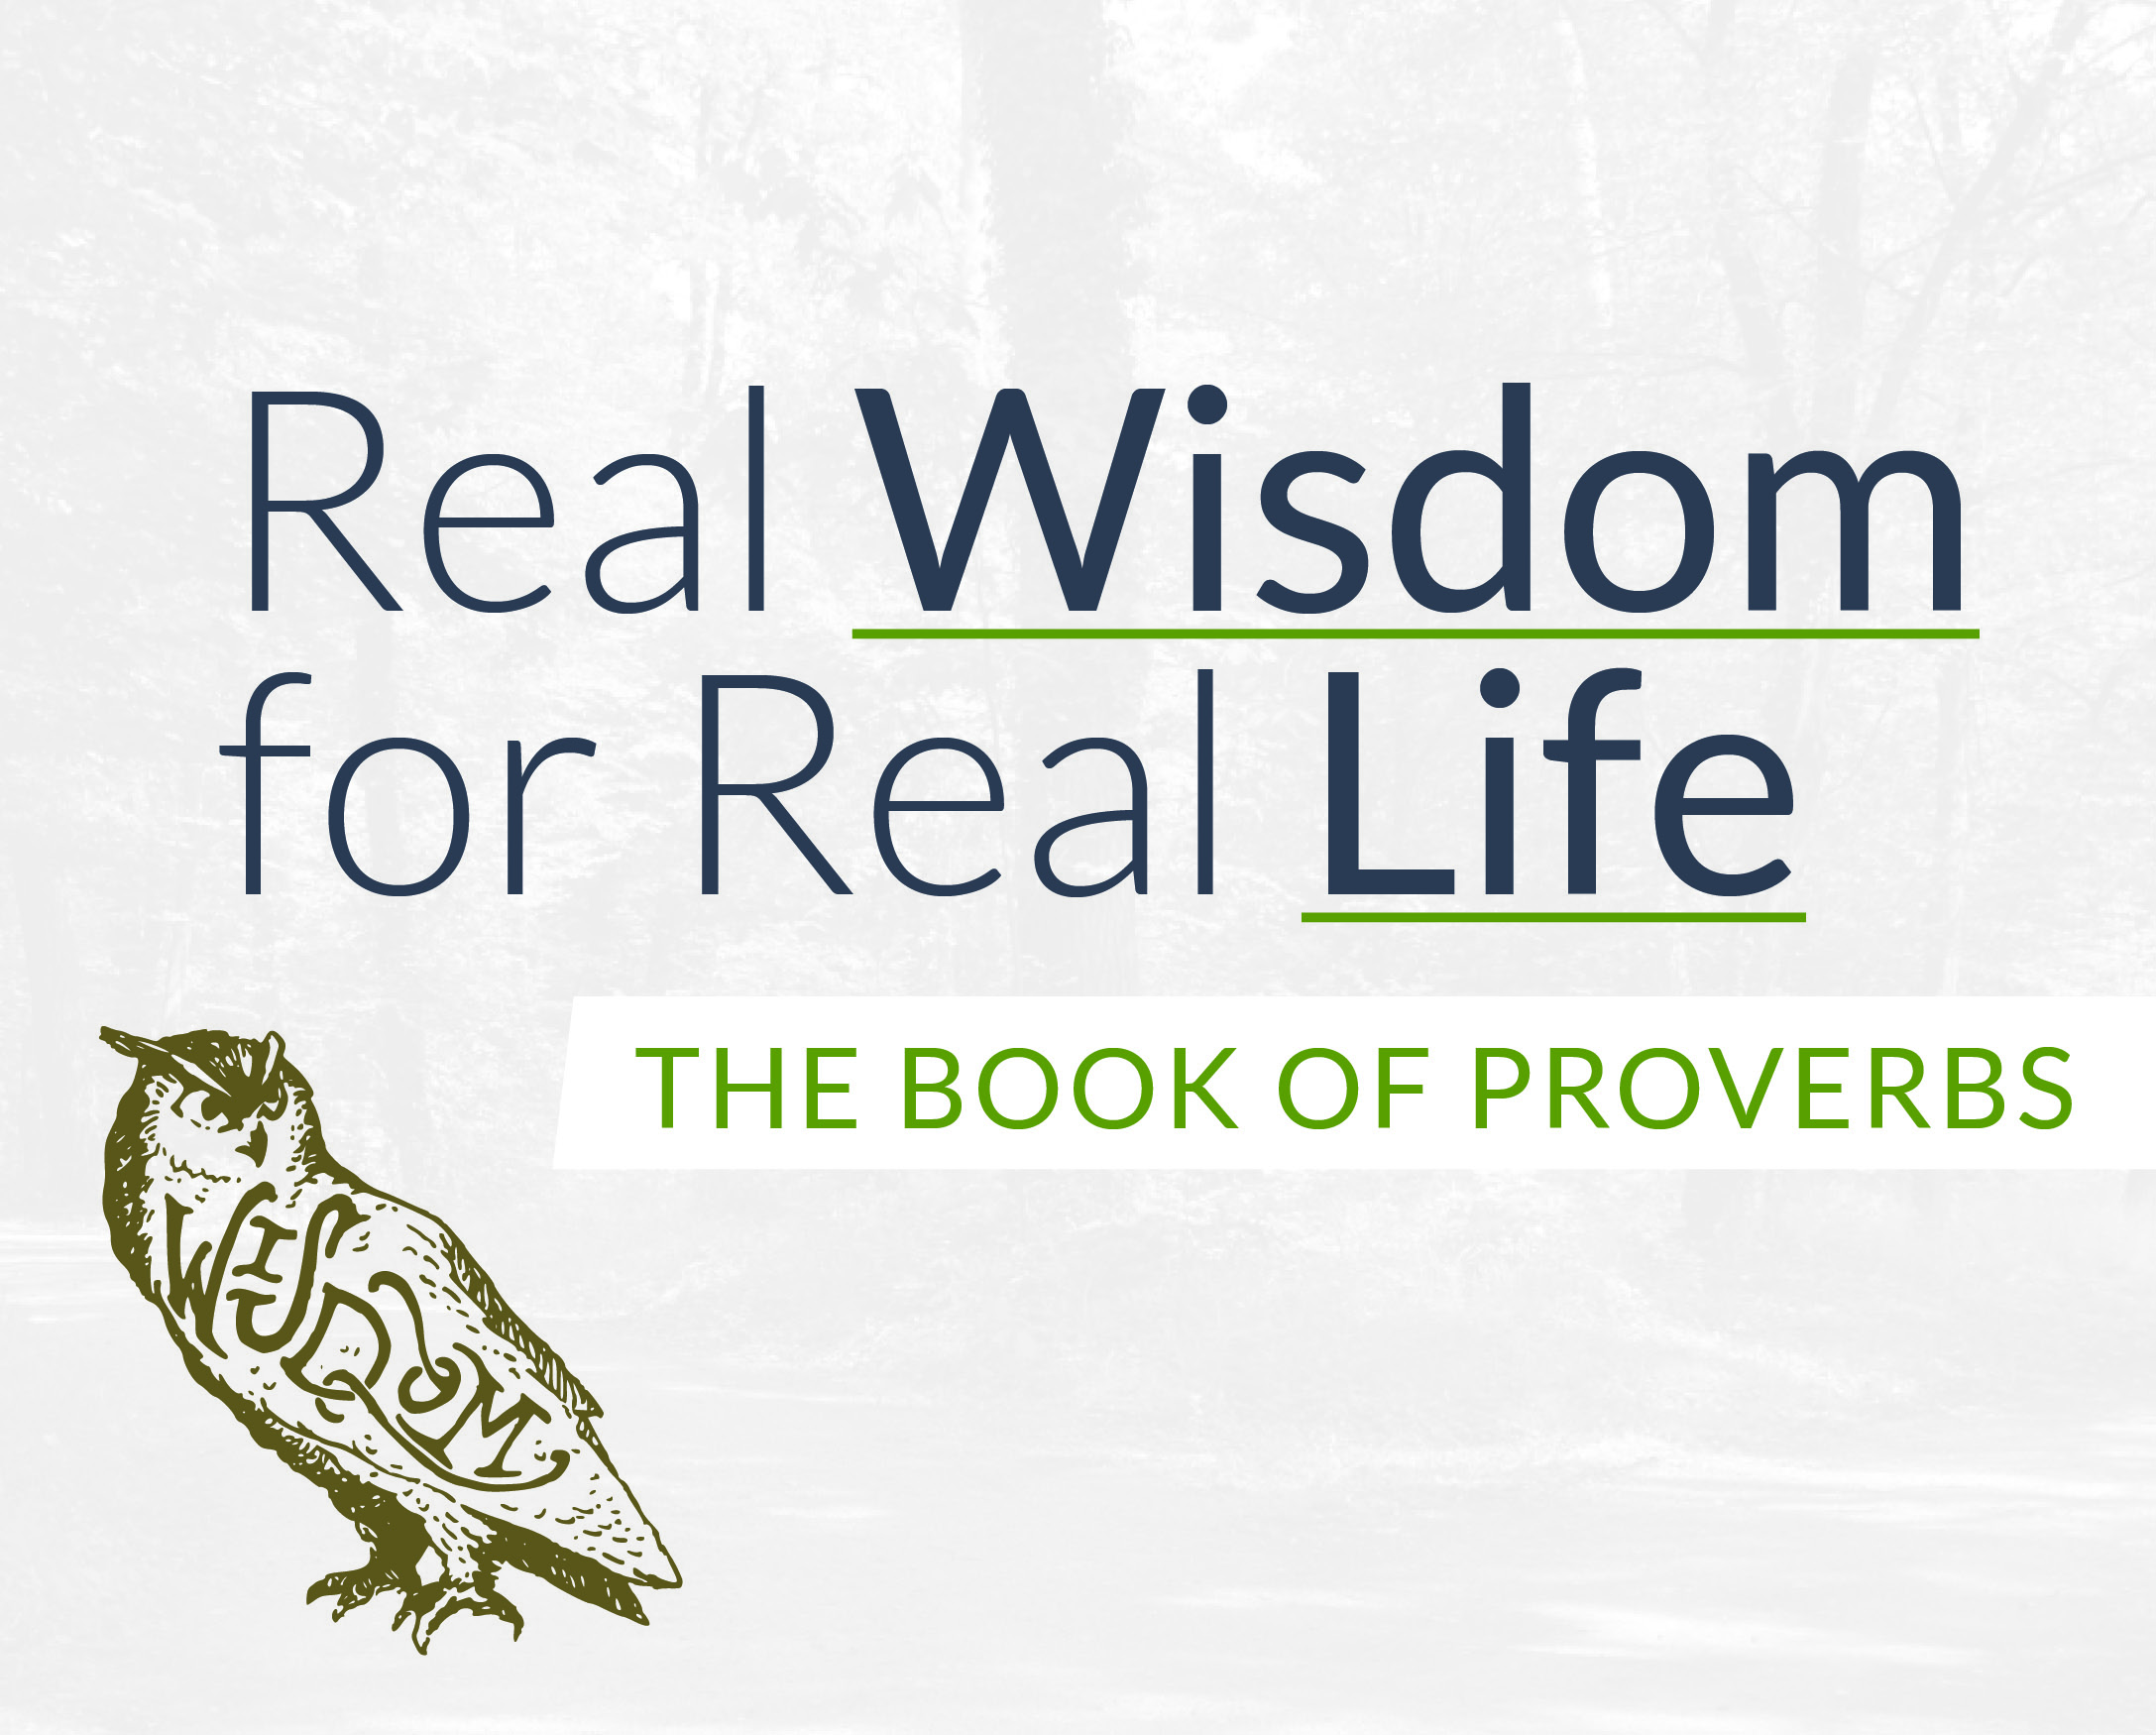 Real Wisdom for Real Life: Fearing and Laughing